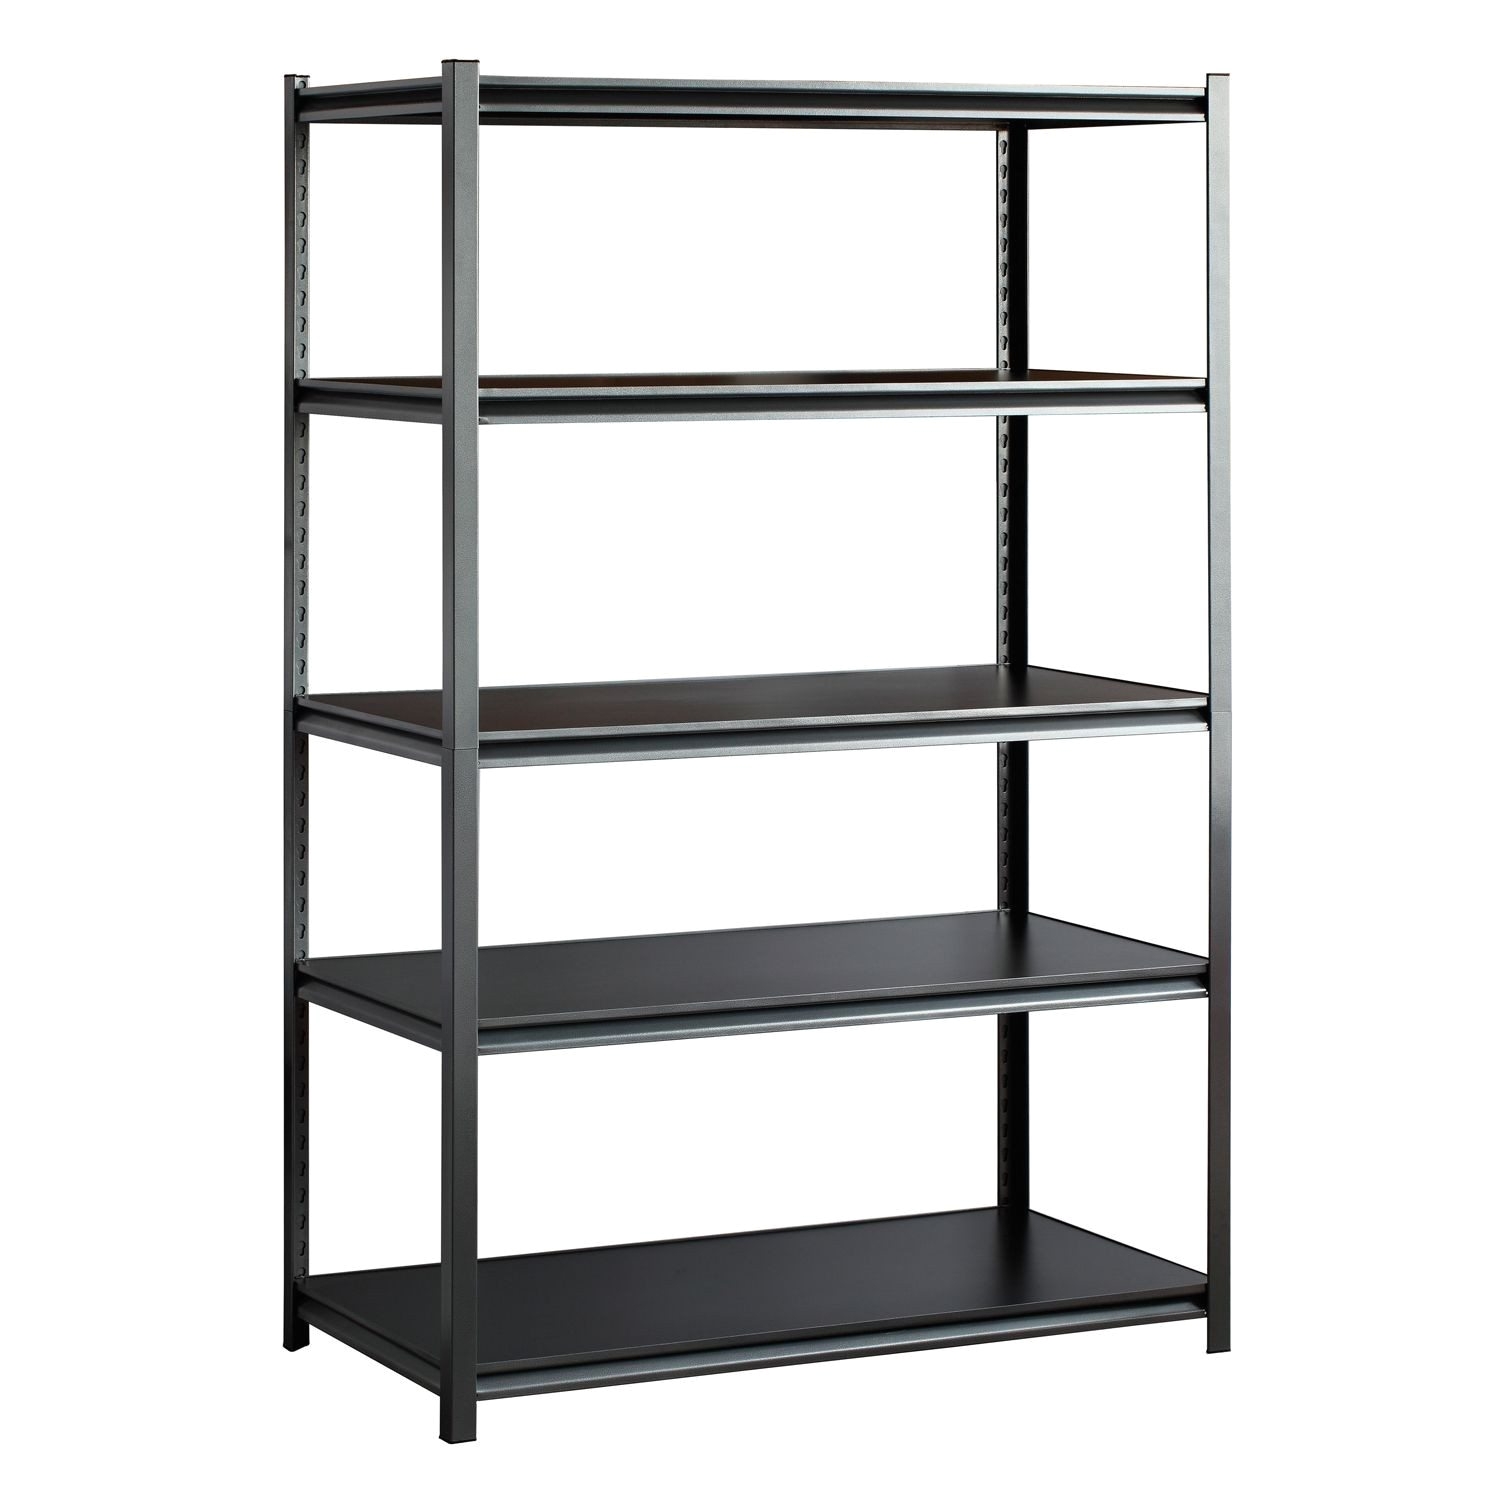 costco steel shelving whalen heavy duty storage rack costco four side with black color